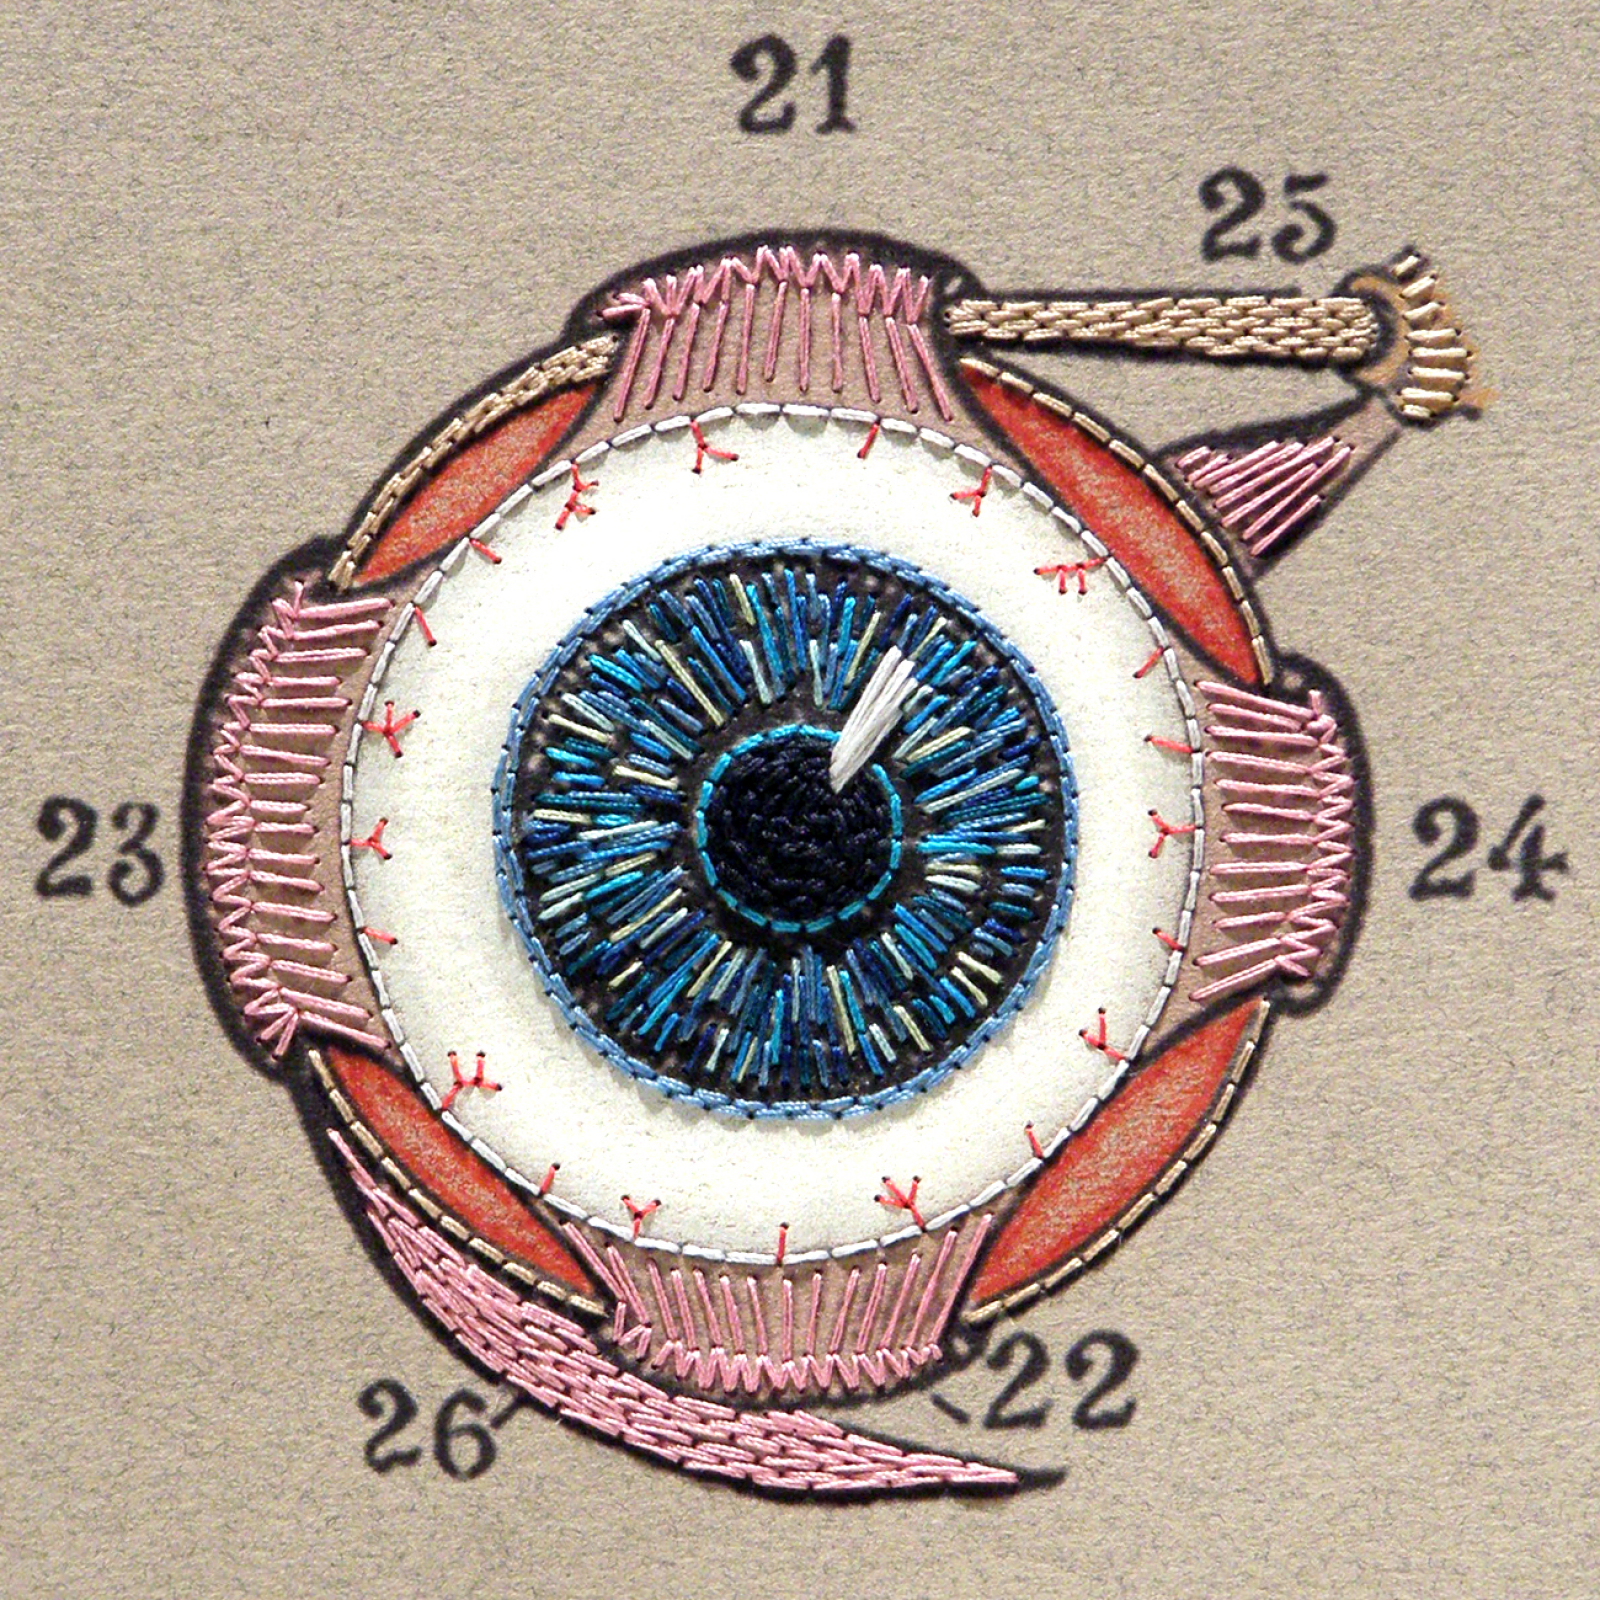 Eye Anatomy. Paper Embroidery